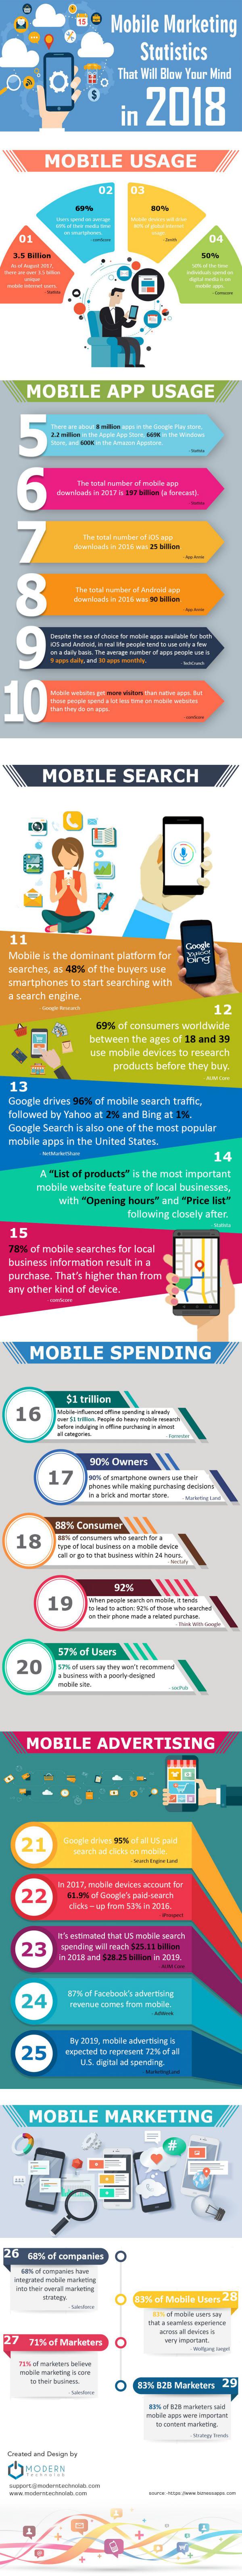 Mobile Marketing Statistics That Will Blow Your Mind In 2018